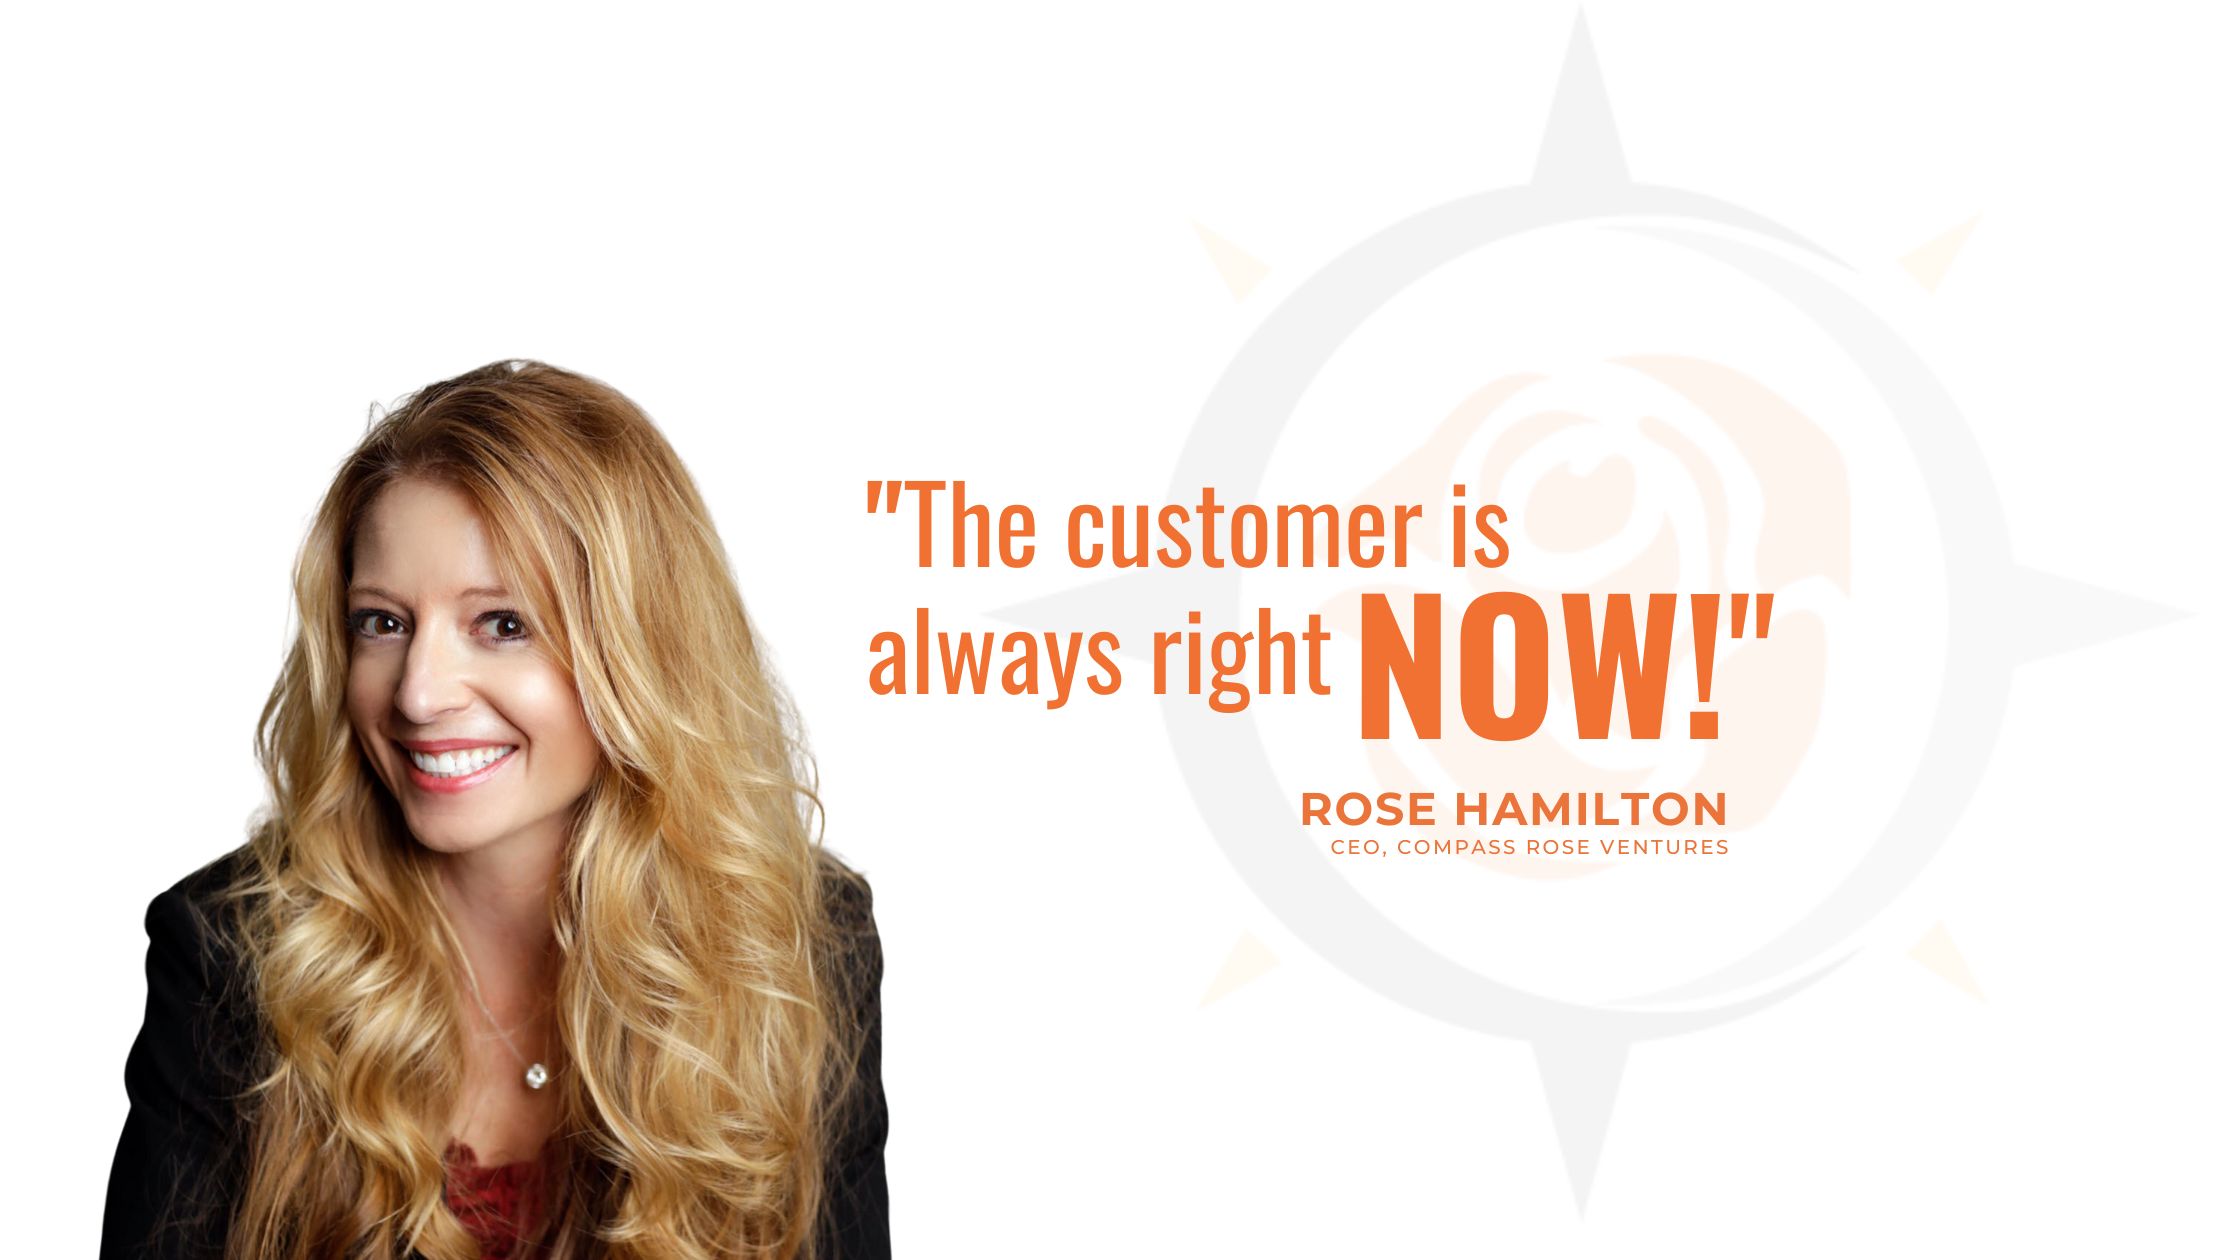 The Customer is Always Right Now!